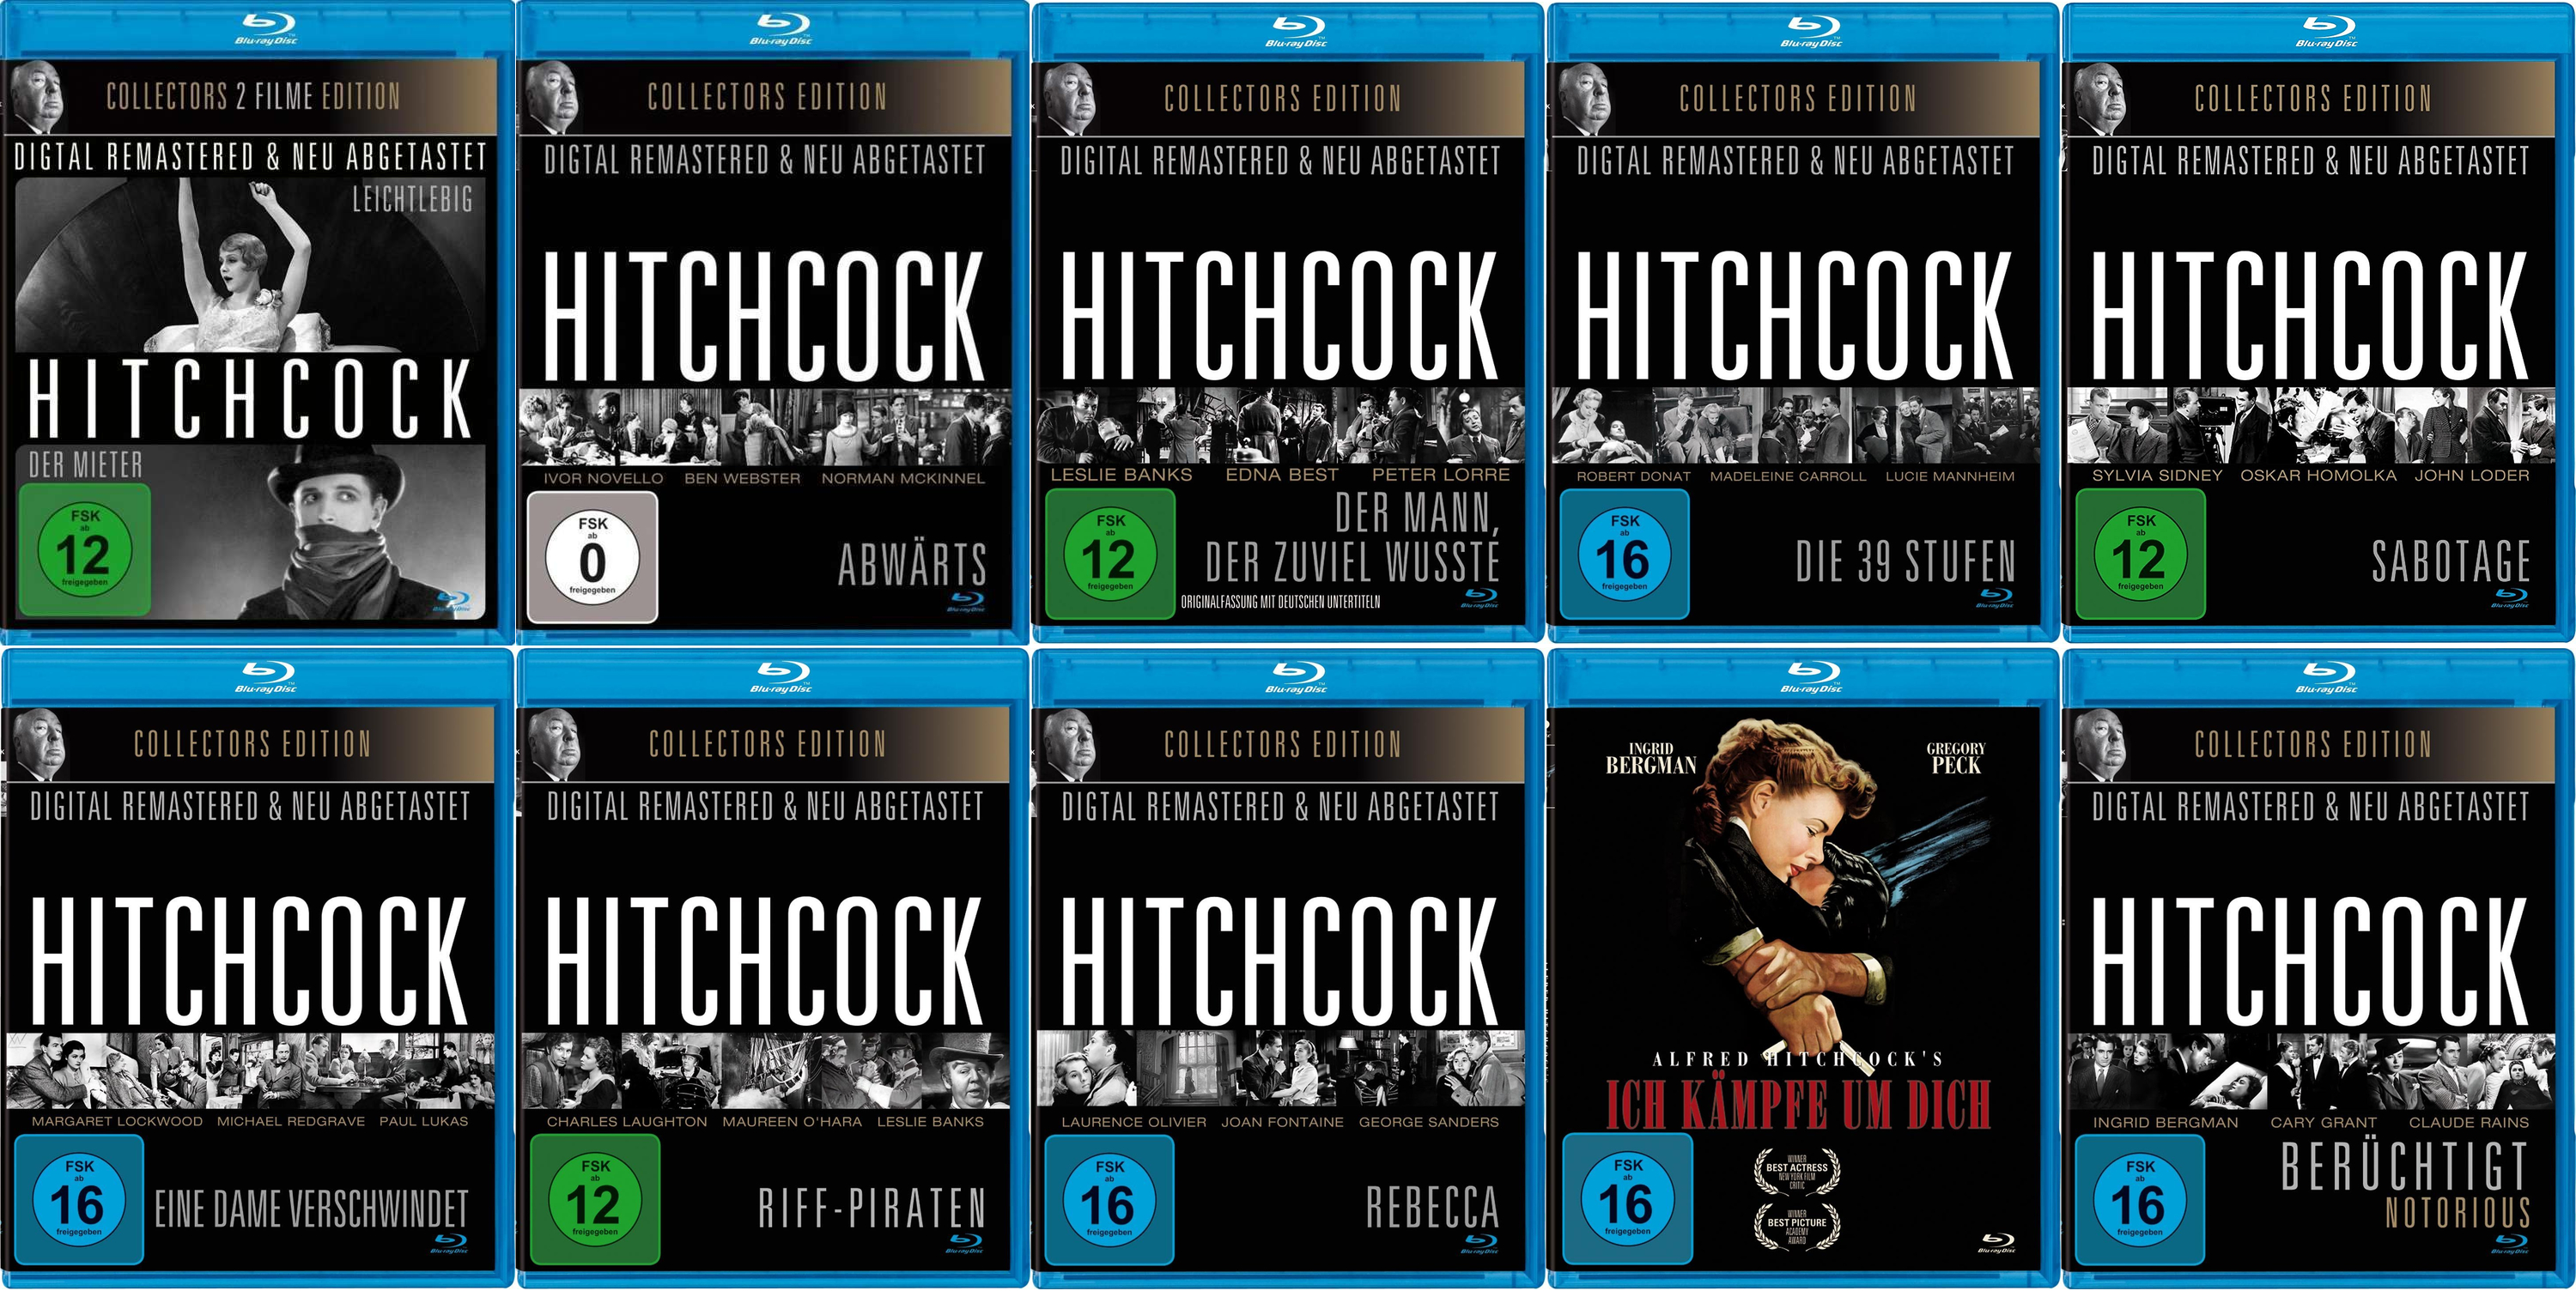 Alfred Hitchcock 1926-1946 German bootleg Blu-rays all from the same company, Great Movies/Indigo/WME Home-Entertainment – they can't make their minds up either.